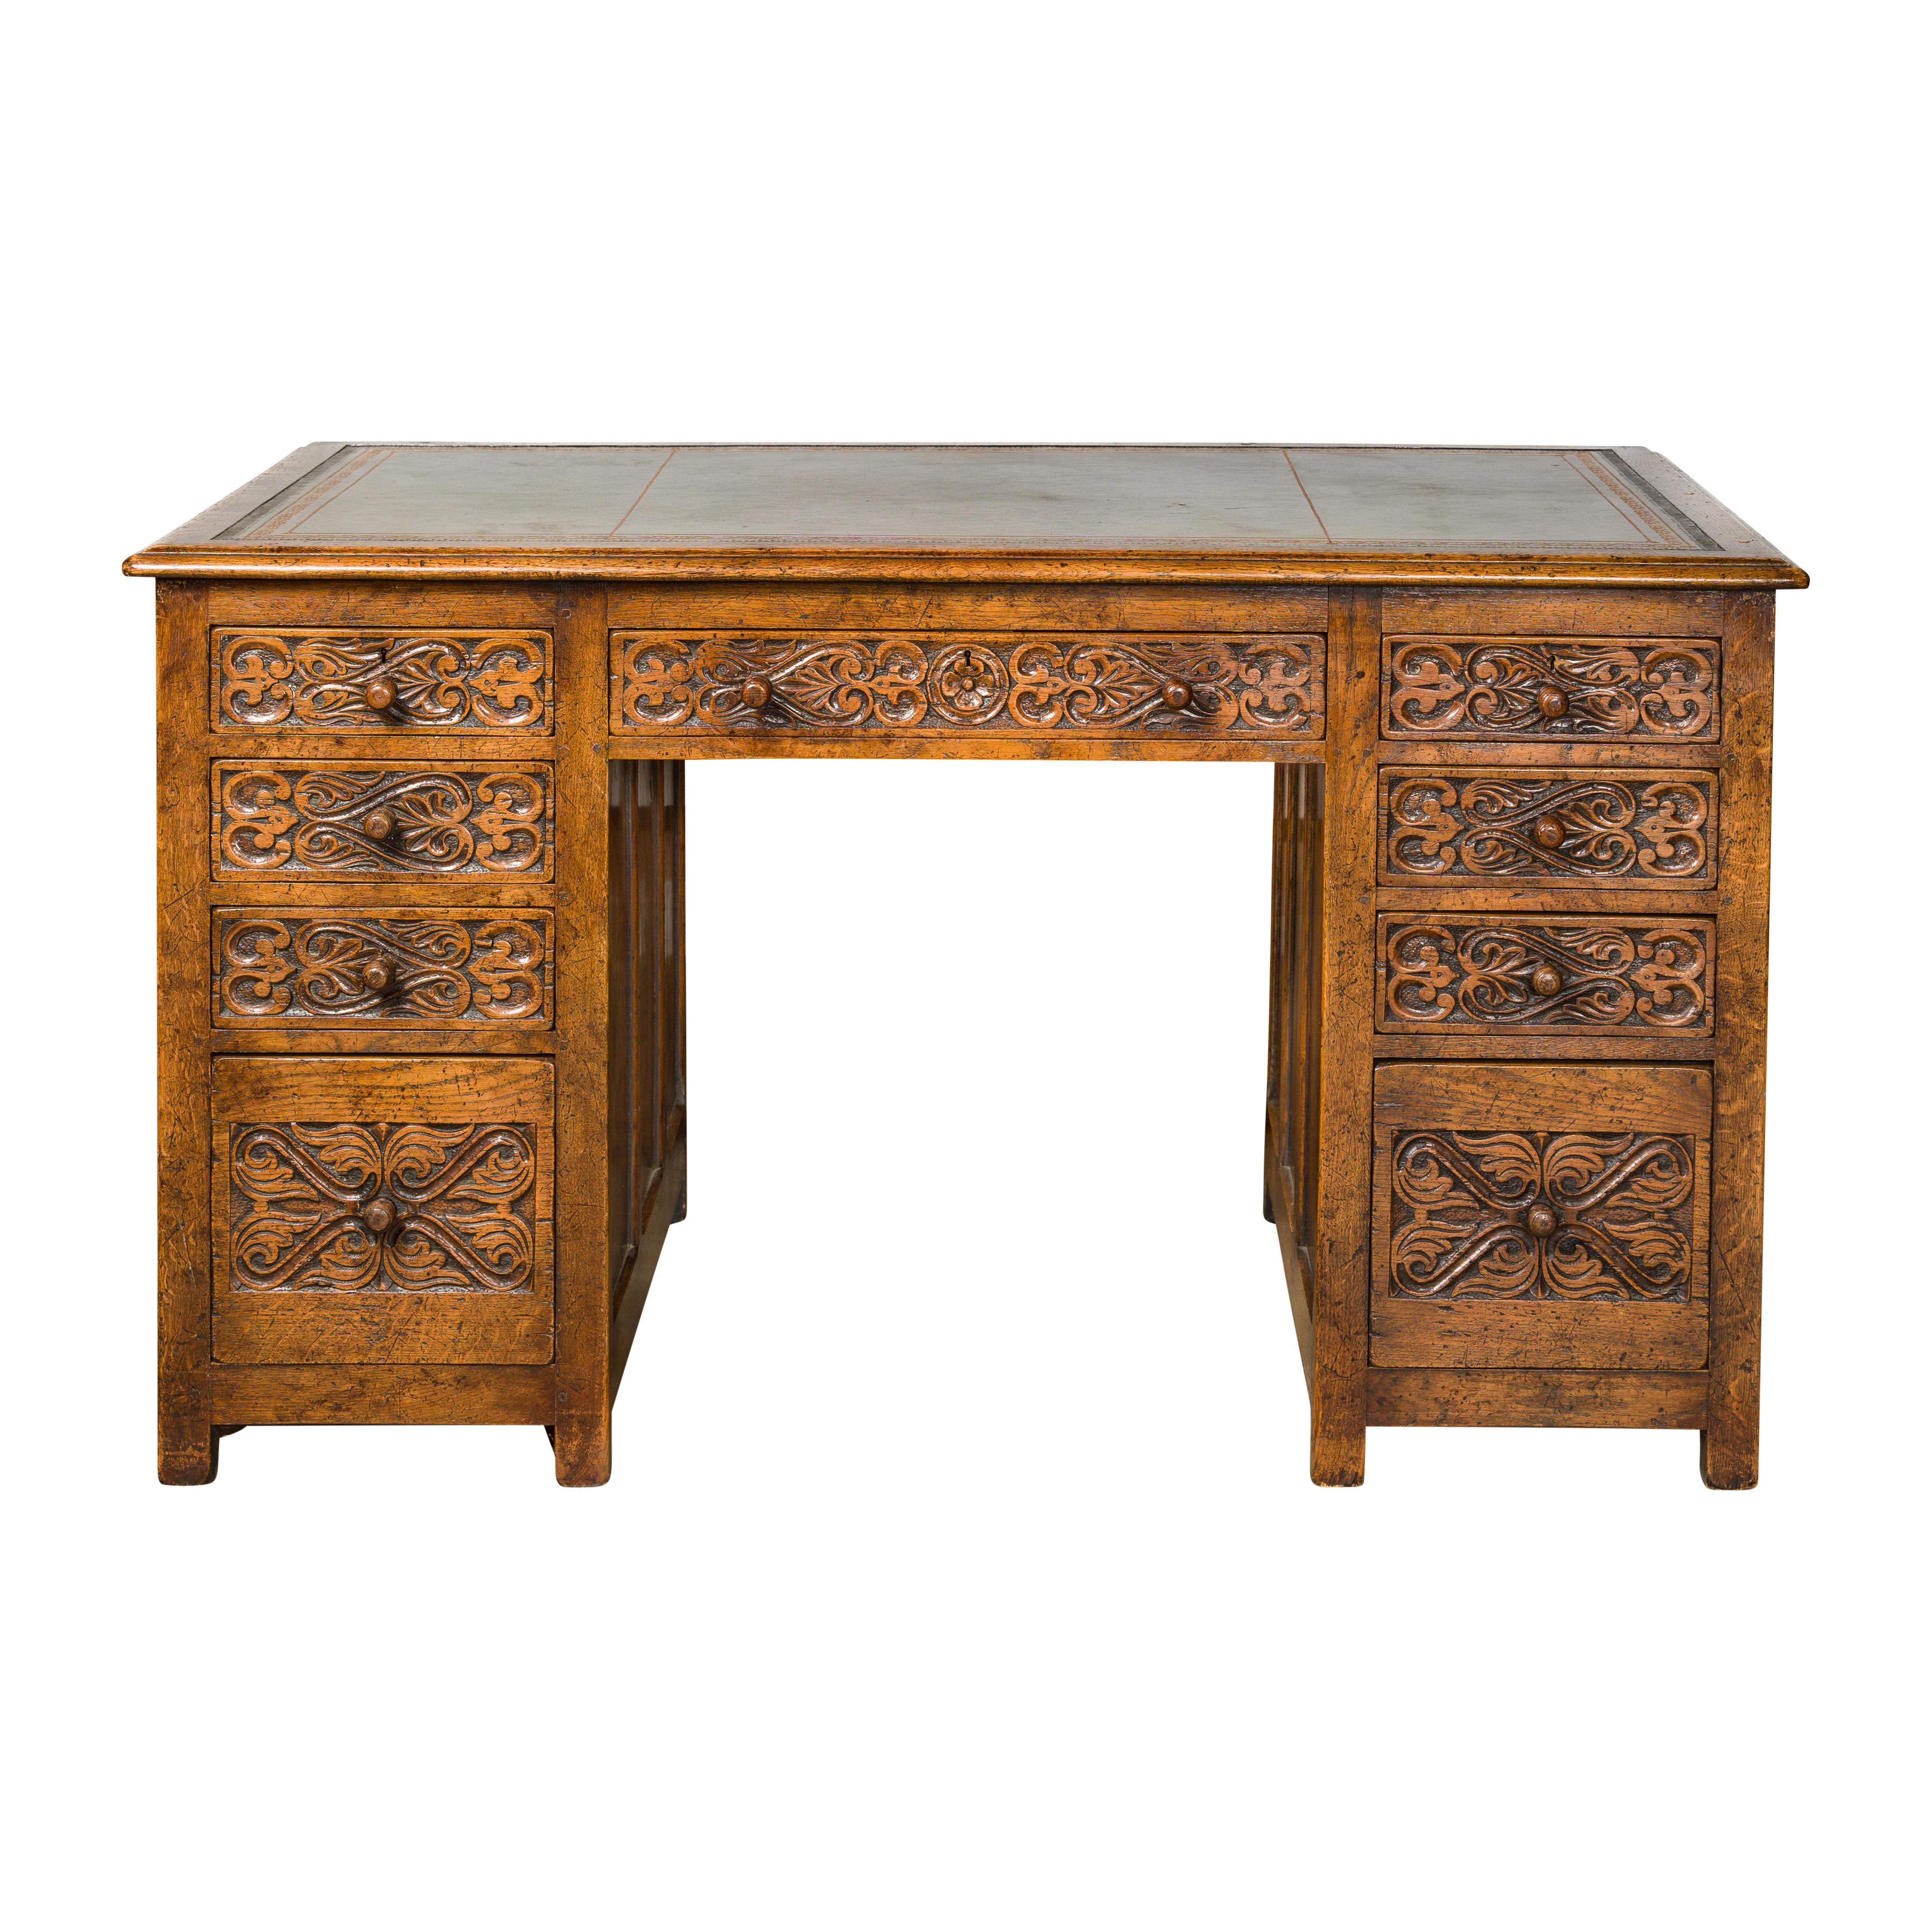 English 19th Century Oak Kneehole Desk with Nine Drawers and Carved Foliage For Sale 15